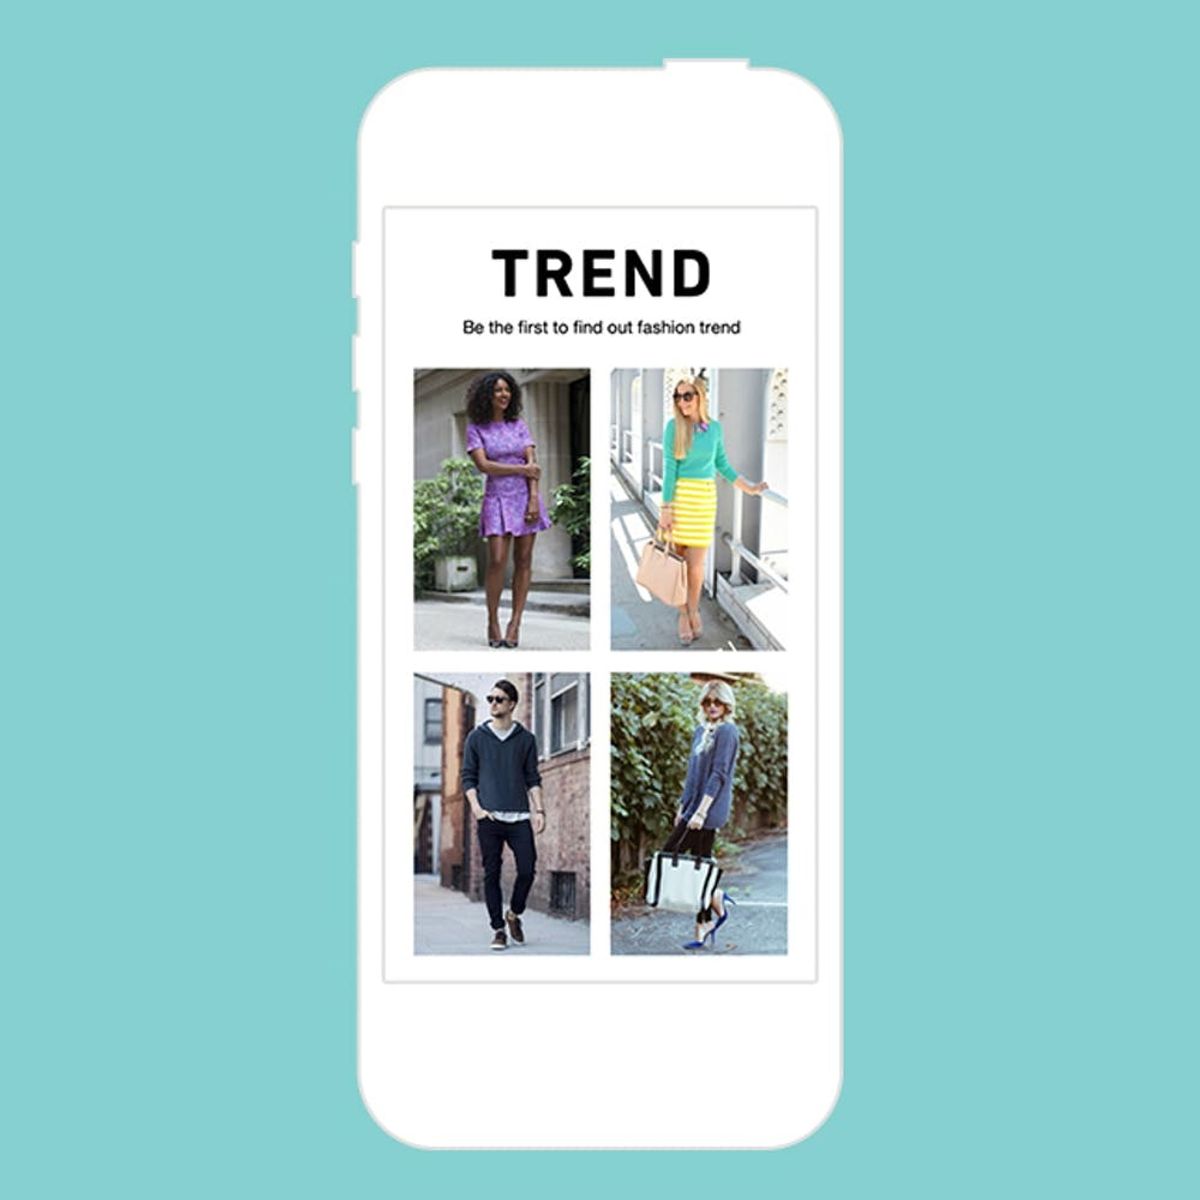 Fashion Stalkers, This Is Your Favorite New App